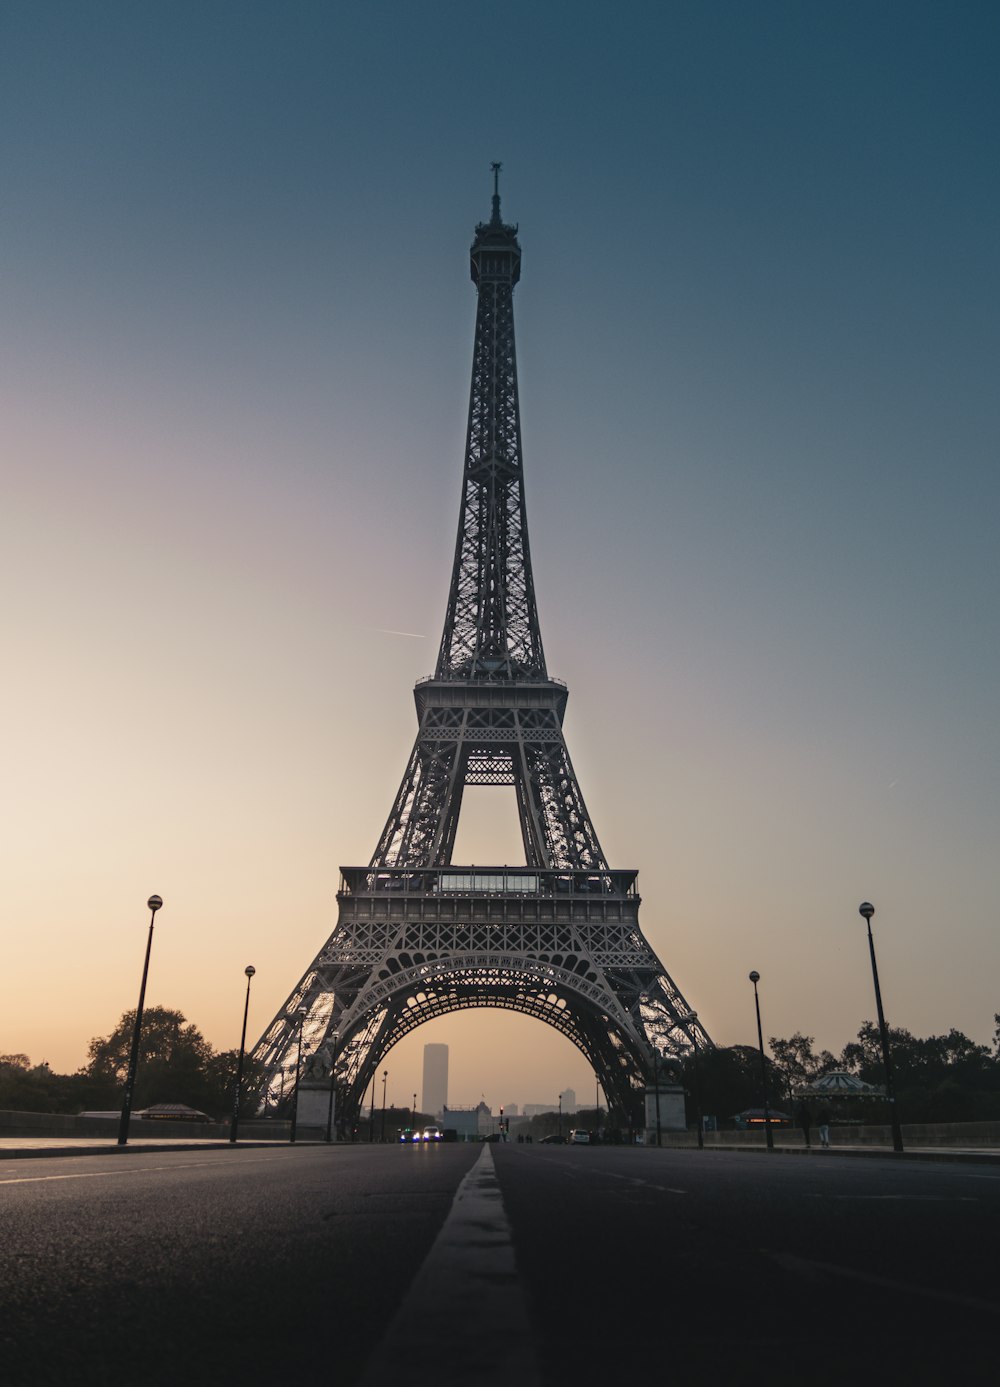 100+ Eiffel-Tower Images - France [HD] | Download Free Images on Unsplash